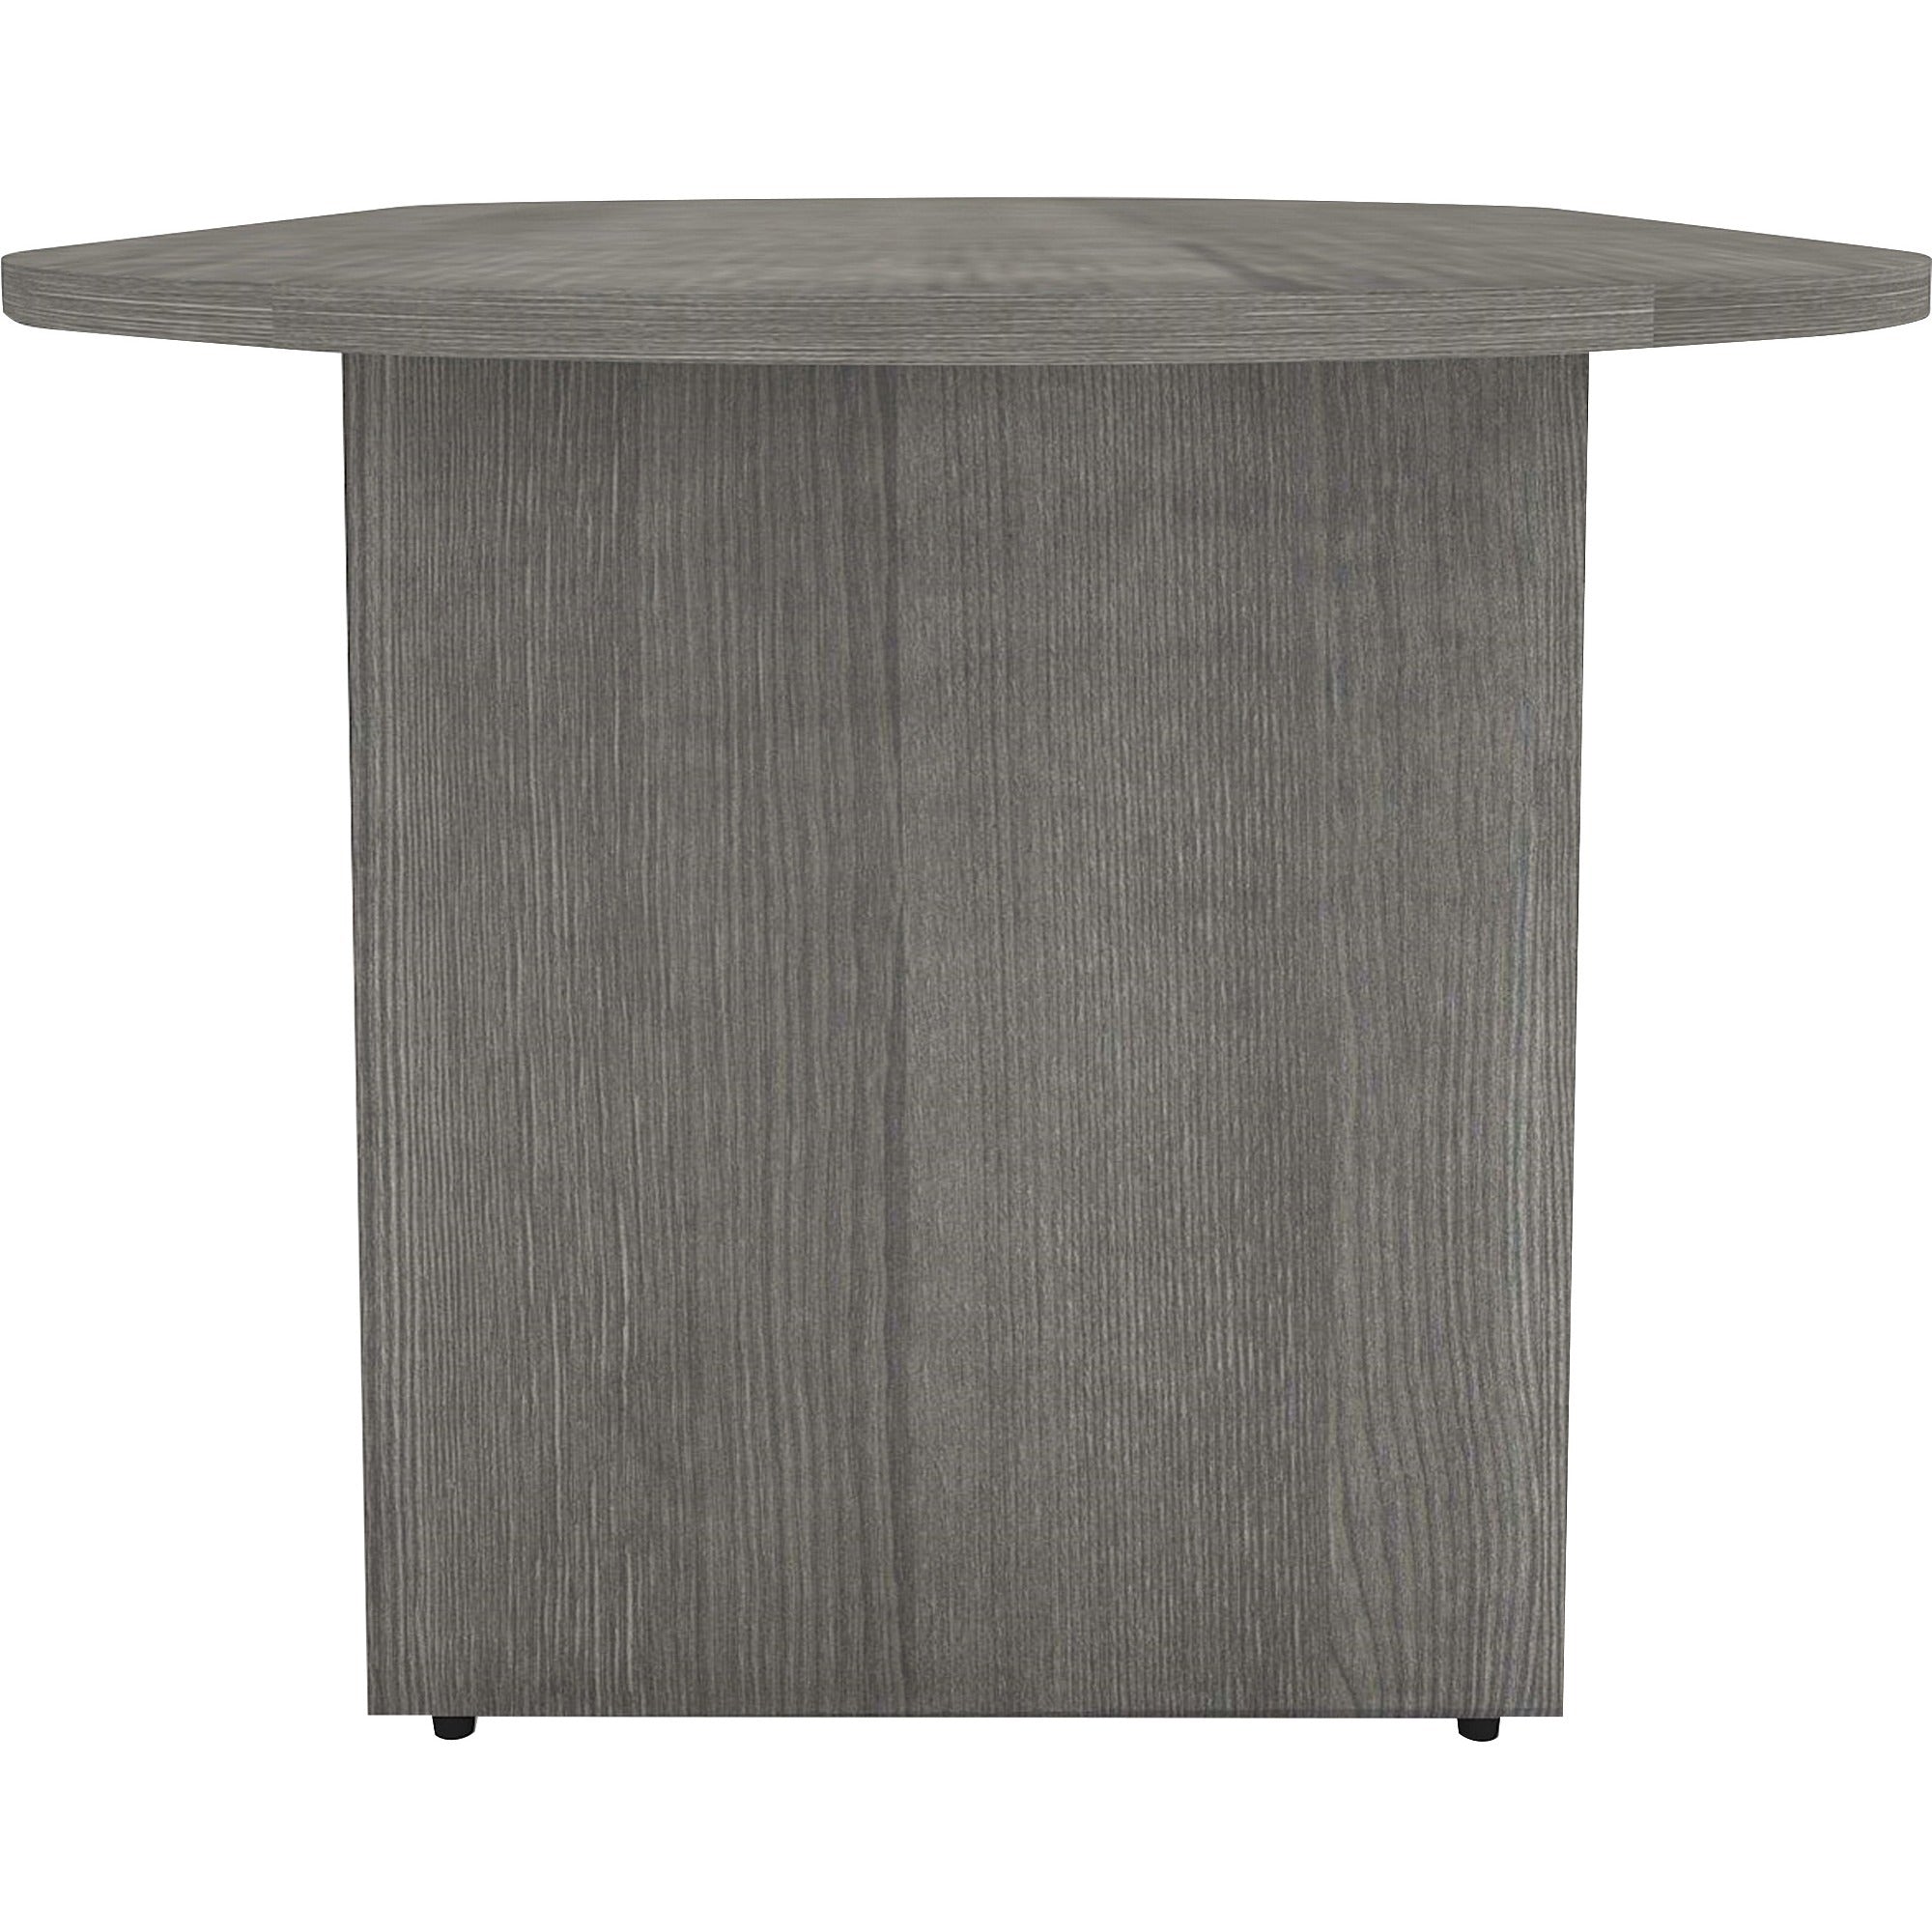 lorell-essentials-oval-conference-table-13-top-0-edge-72-x-29536-finish-weathered-charcoal-laminate_llr69569 - 3